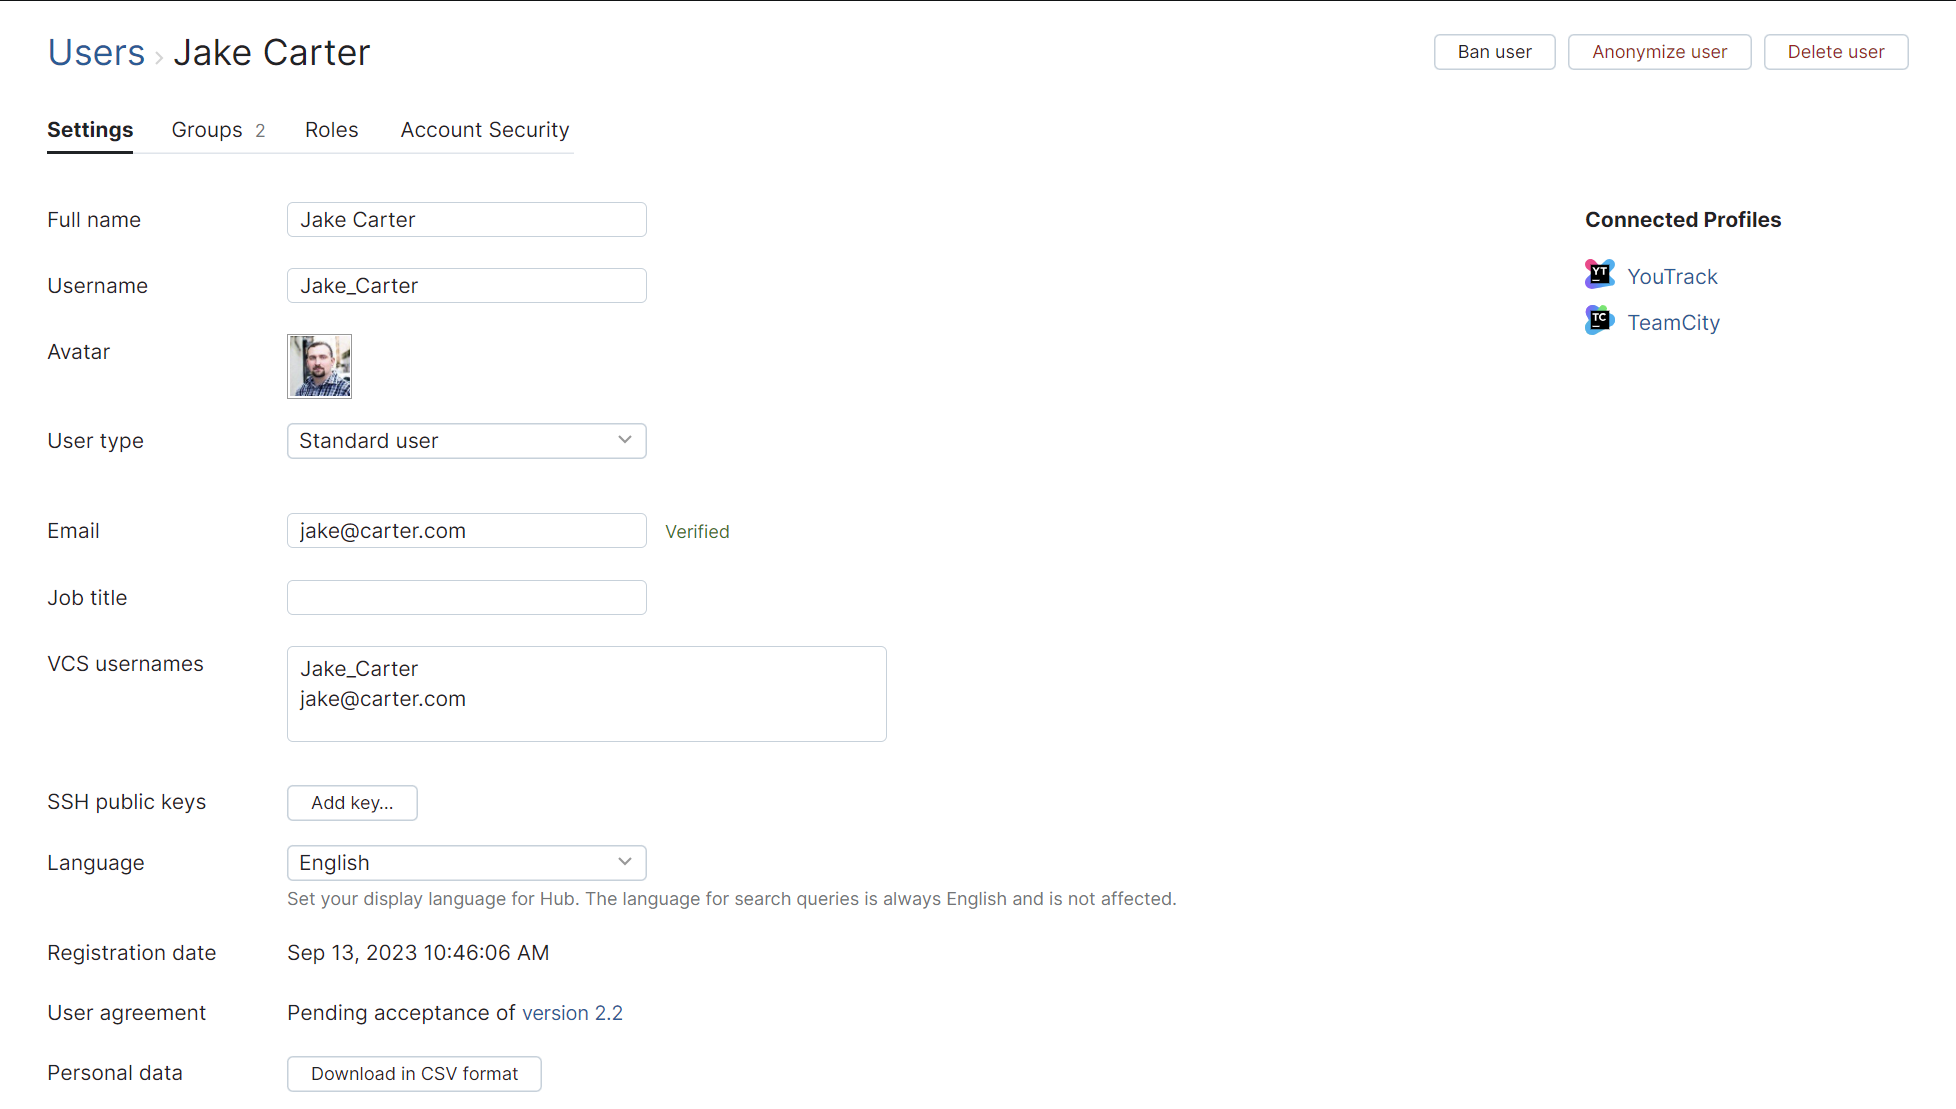 The general settings for a user profile in Hub.